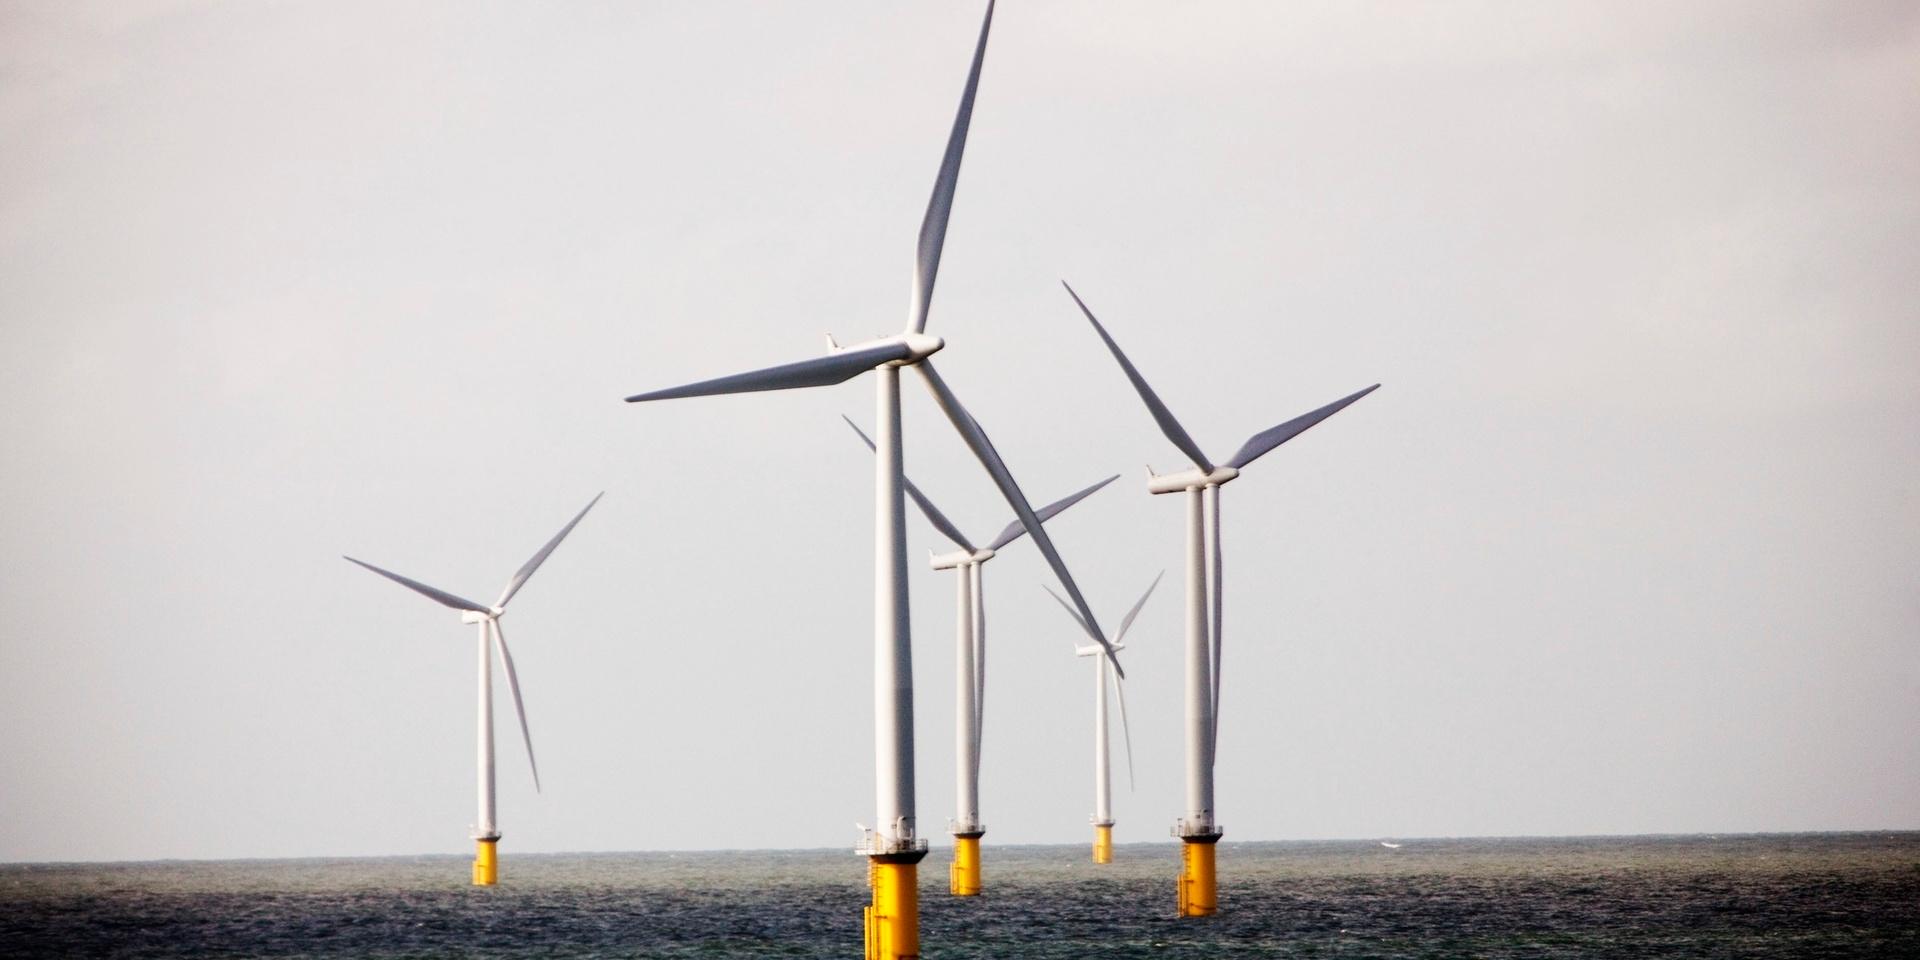 Some of the wind turbines which make up part of one of the world world's biggest offshore wind farm operated by Dong Enegry is seen in the North Sea, 19 miles (30 kilometers) west of Denmark's Jutland peninsula, Thursday, Sept. 17, 2009.  Denmark's Crown Prince Frederik, flipped a switch Thursday to start 91 wind turbines in the North Sea,which operator Dong Energy says has a production capacity of 209 megawatts, enough to power 200,000 homes.  Denmark, a pioneer in wind energy, has six other offshore wind farms. (AP Photo/Jasper Carlberg/POLFOTO) **DENMARK OUT**